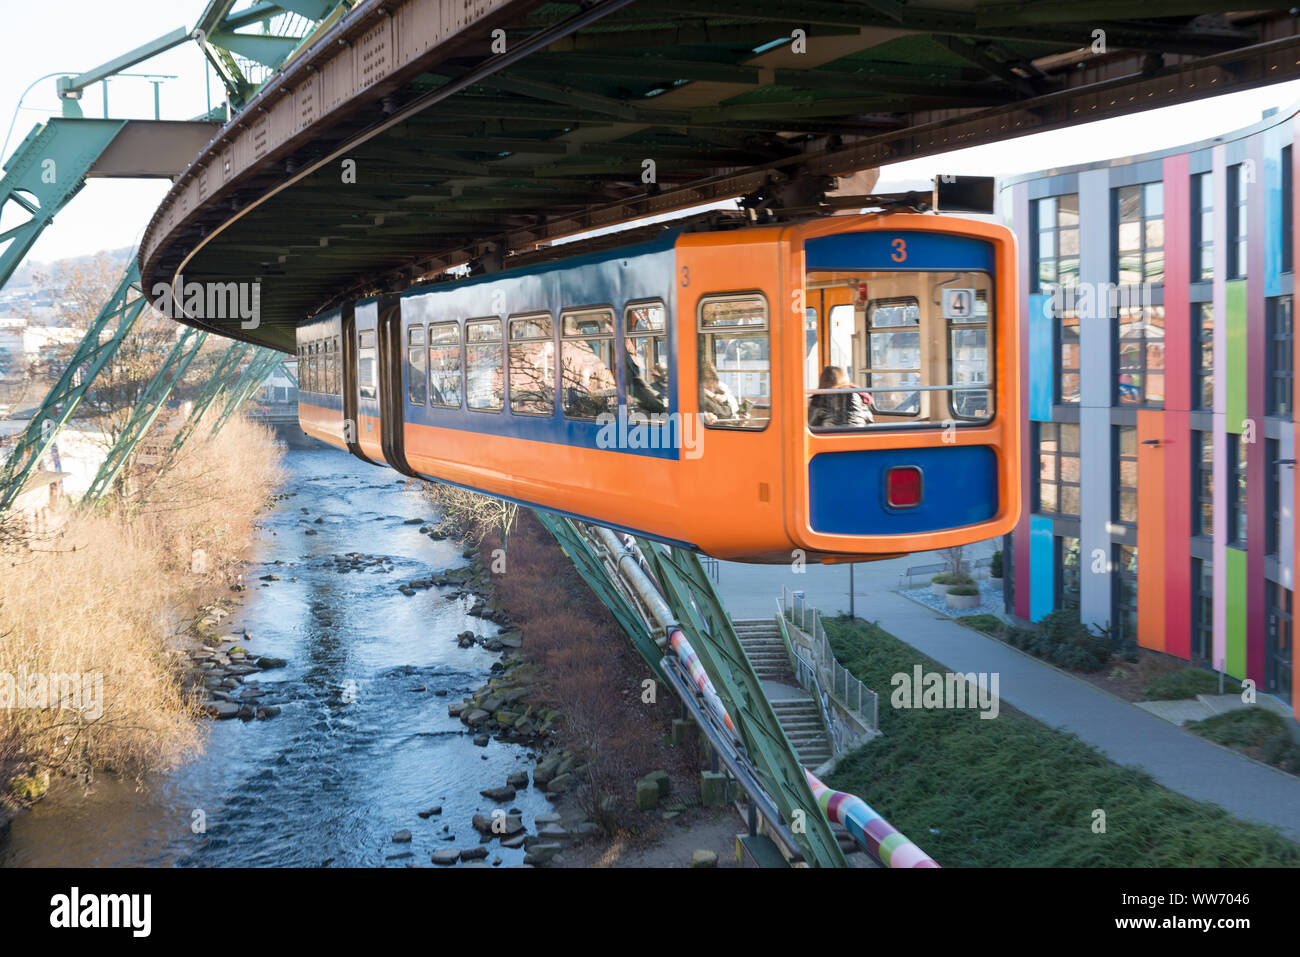 Germany, North Rhine-Westphalia, Wuppertal, the Wuppertal suspension  railway is a public transport system that was opened on 1 March 1901,  vehicle of the type 1972 / GTW 72 Stock Photo - Alamy